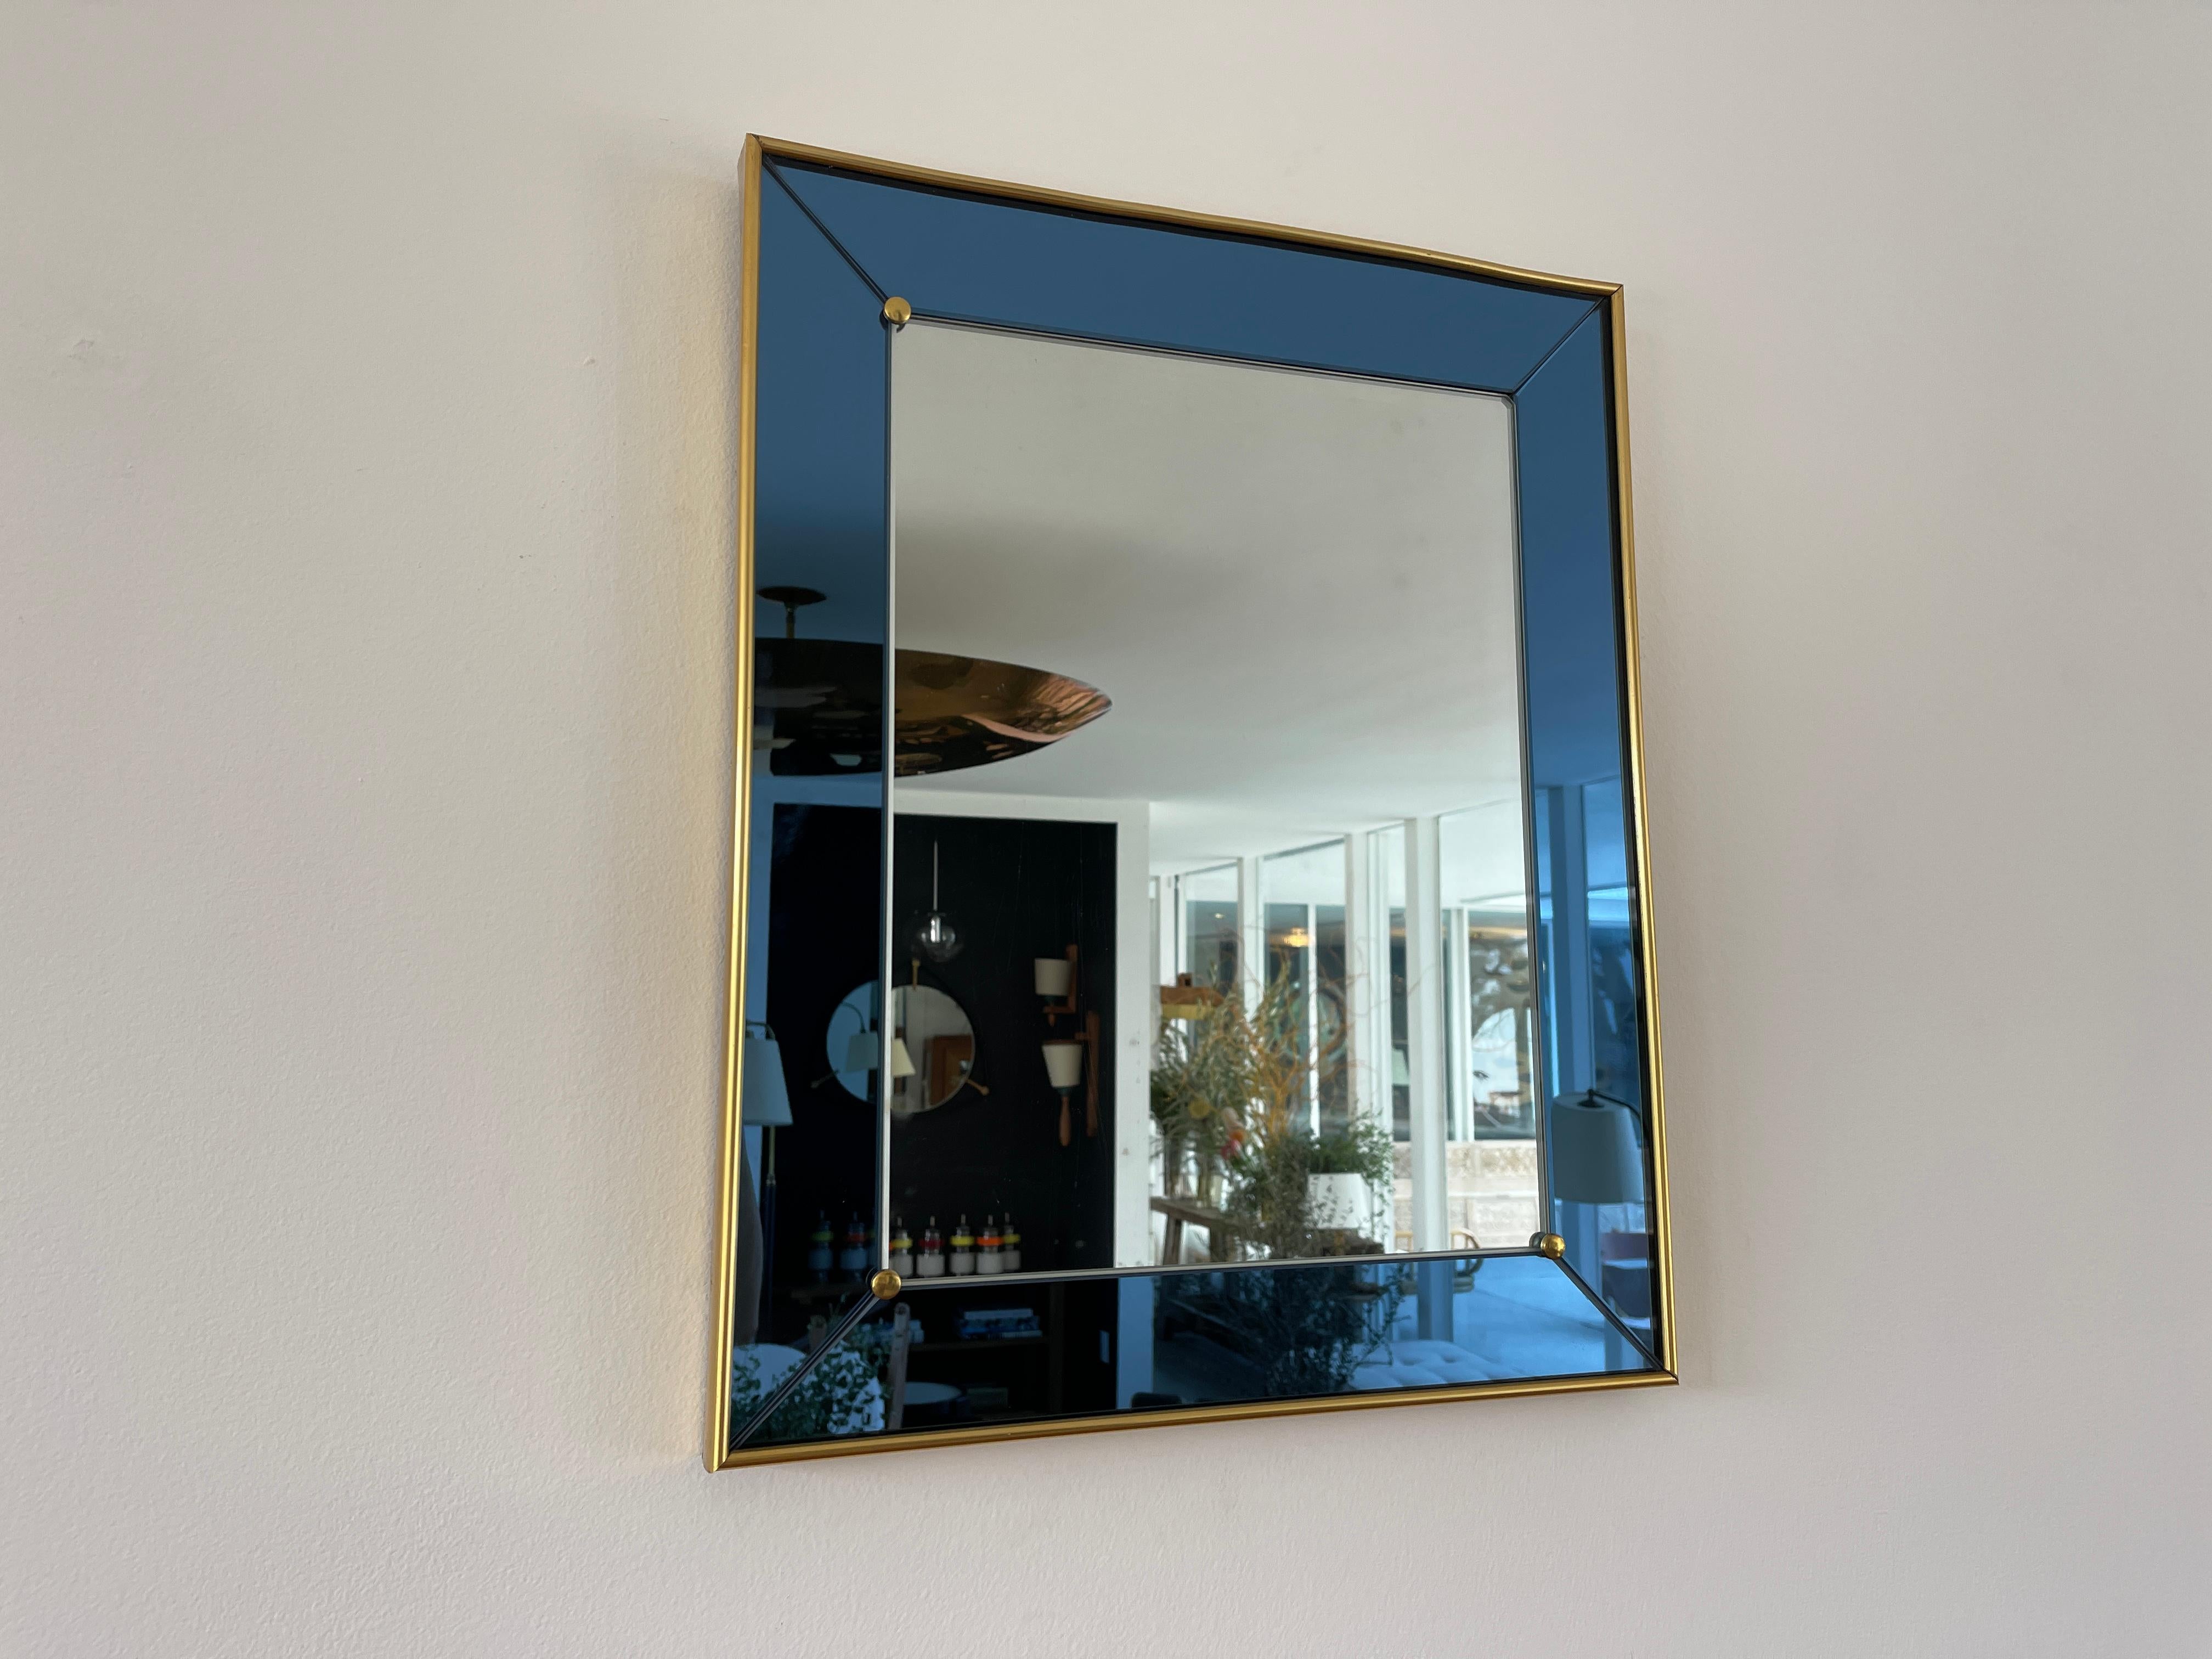 Cristal Art mirror with royal blue glass and brass frame / hardware. 
Italy, circa 1970s